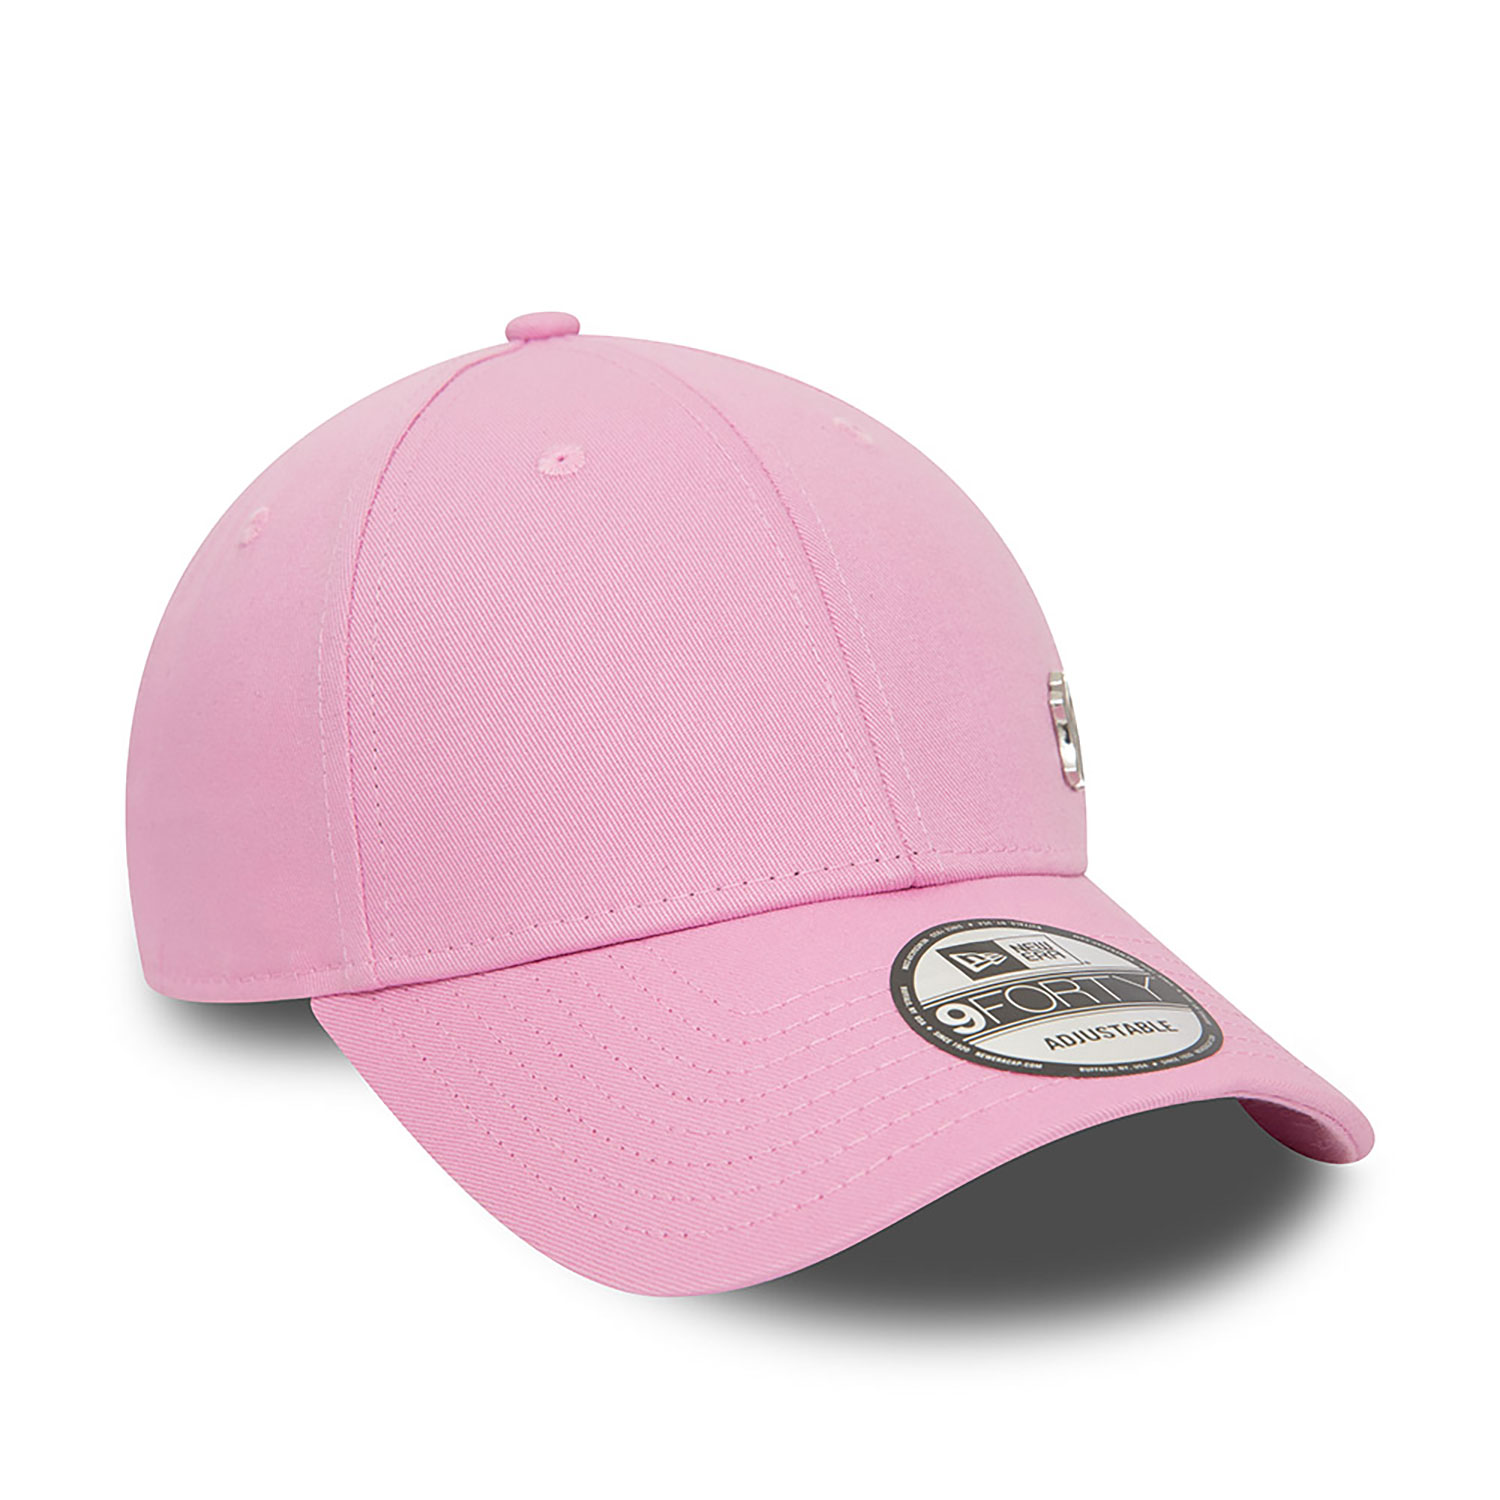 New York Yankees MLB Flawless Pink 9FORTY Adjustable Cap